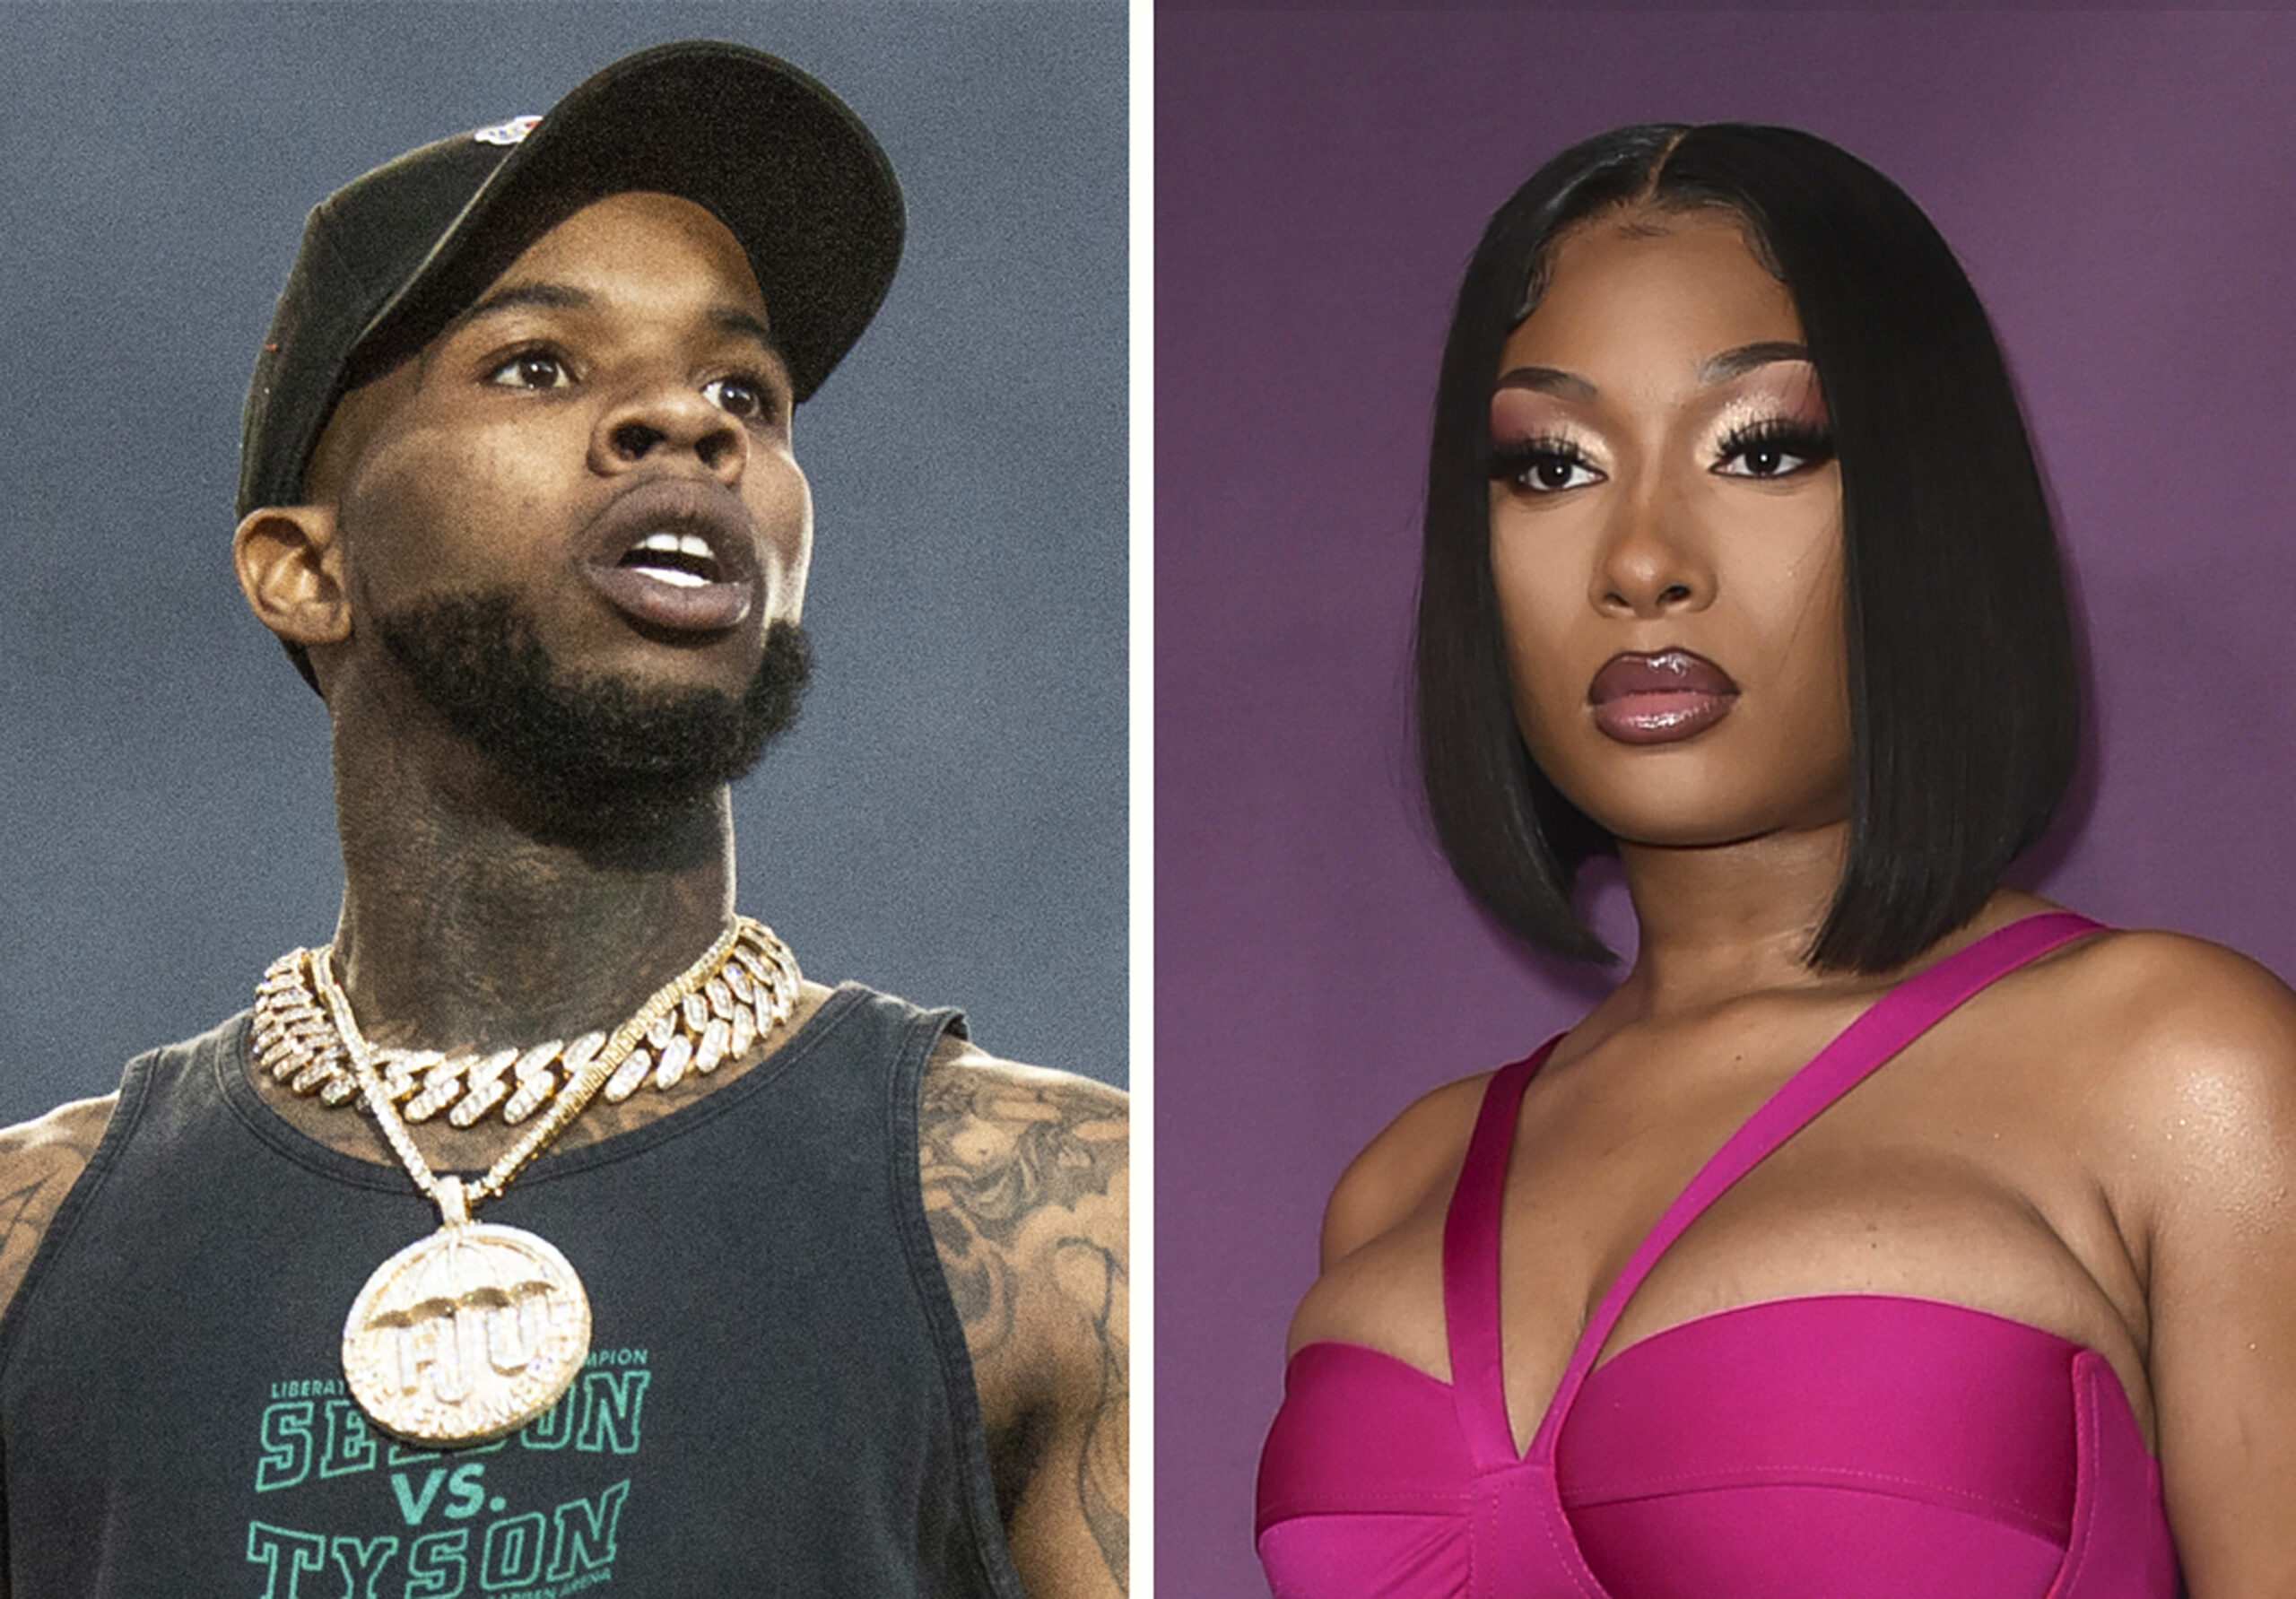 A judge sentences rapper Tory Lanez to 10 years in prison on Tuesday for shooting and wounding hip-hop superstar Megan Thee Stallion in the feet